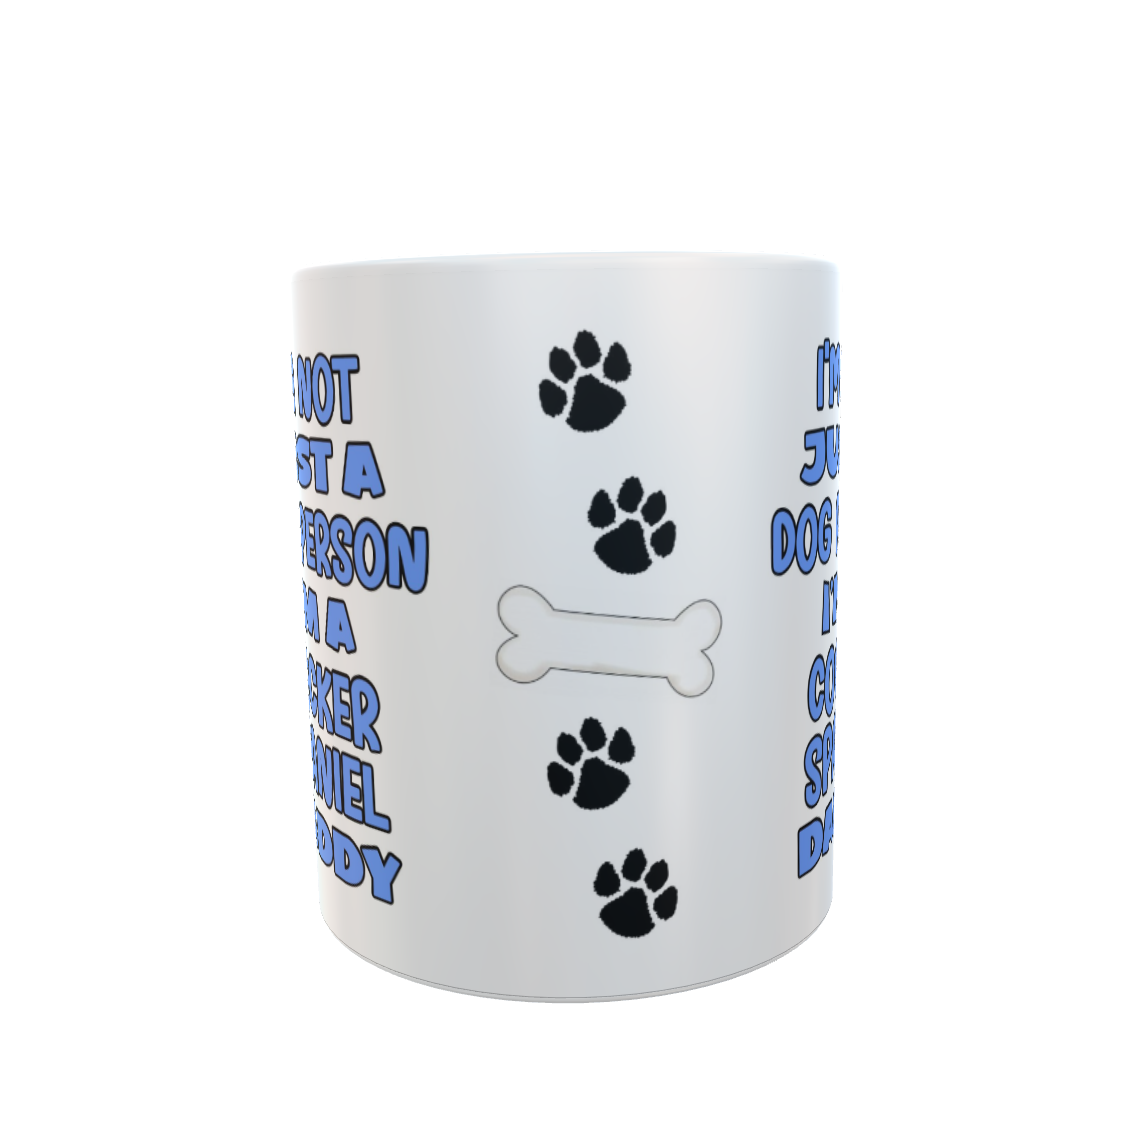 Cocker Spaniel Mug Gift - I'm Not Just A Dog Person I'm A Daddy - Nice Funny Cute Novelty Pet Owner Cup Present